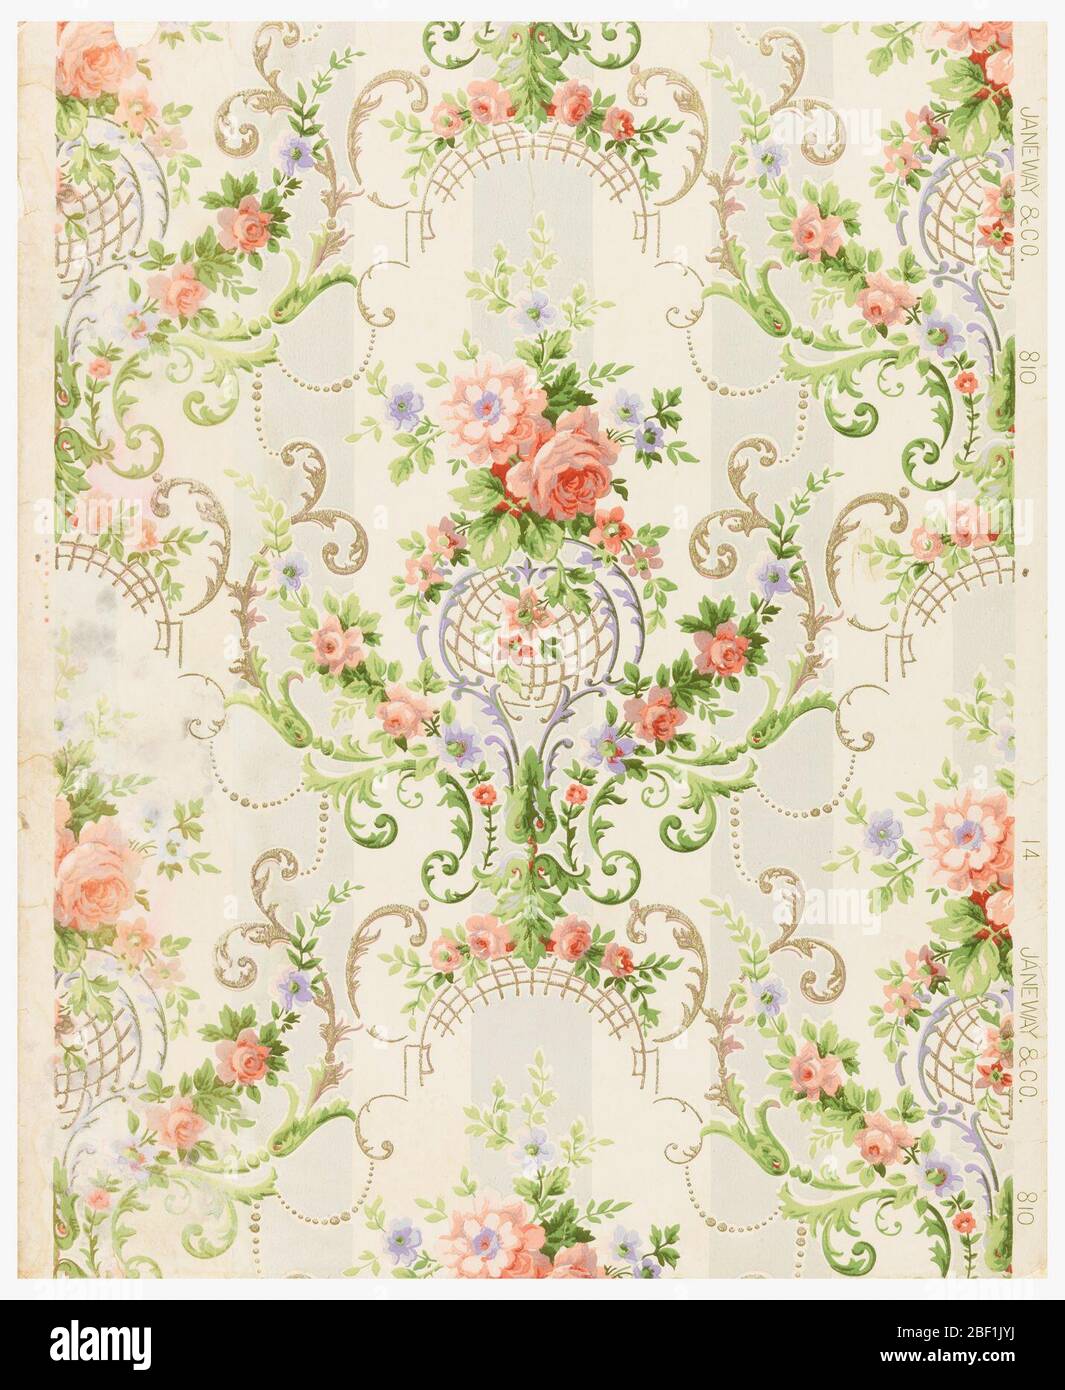 Sidewall. Modified rococo design of green and gold scrolls, sprays of roses are festooned over scrolls. The background is composed of two wide stripes, one gray and the other ivory. Printed on margin: "14, Janeway & Co., 810". Stock Photo